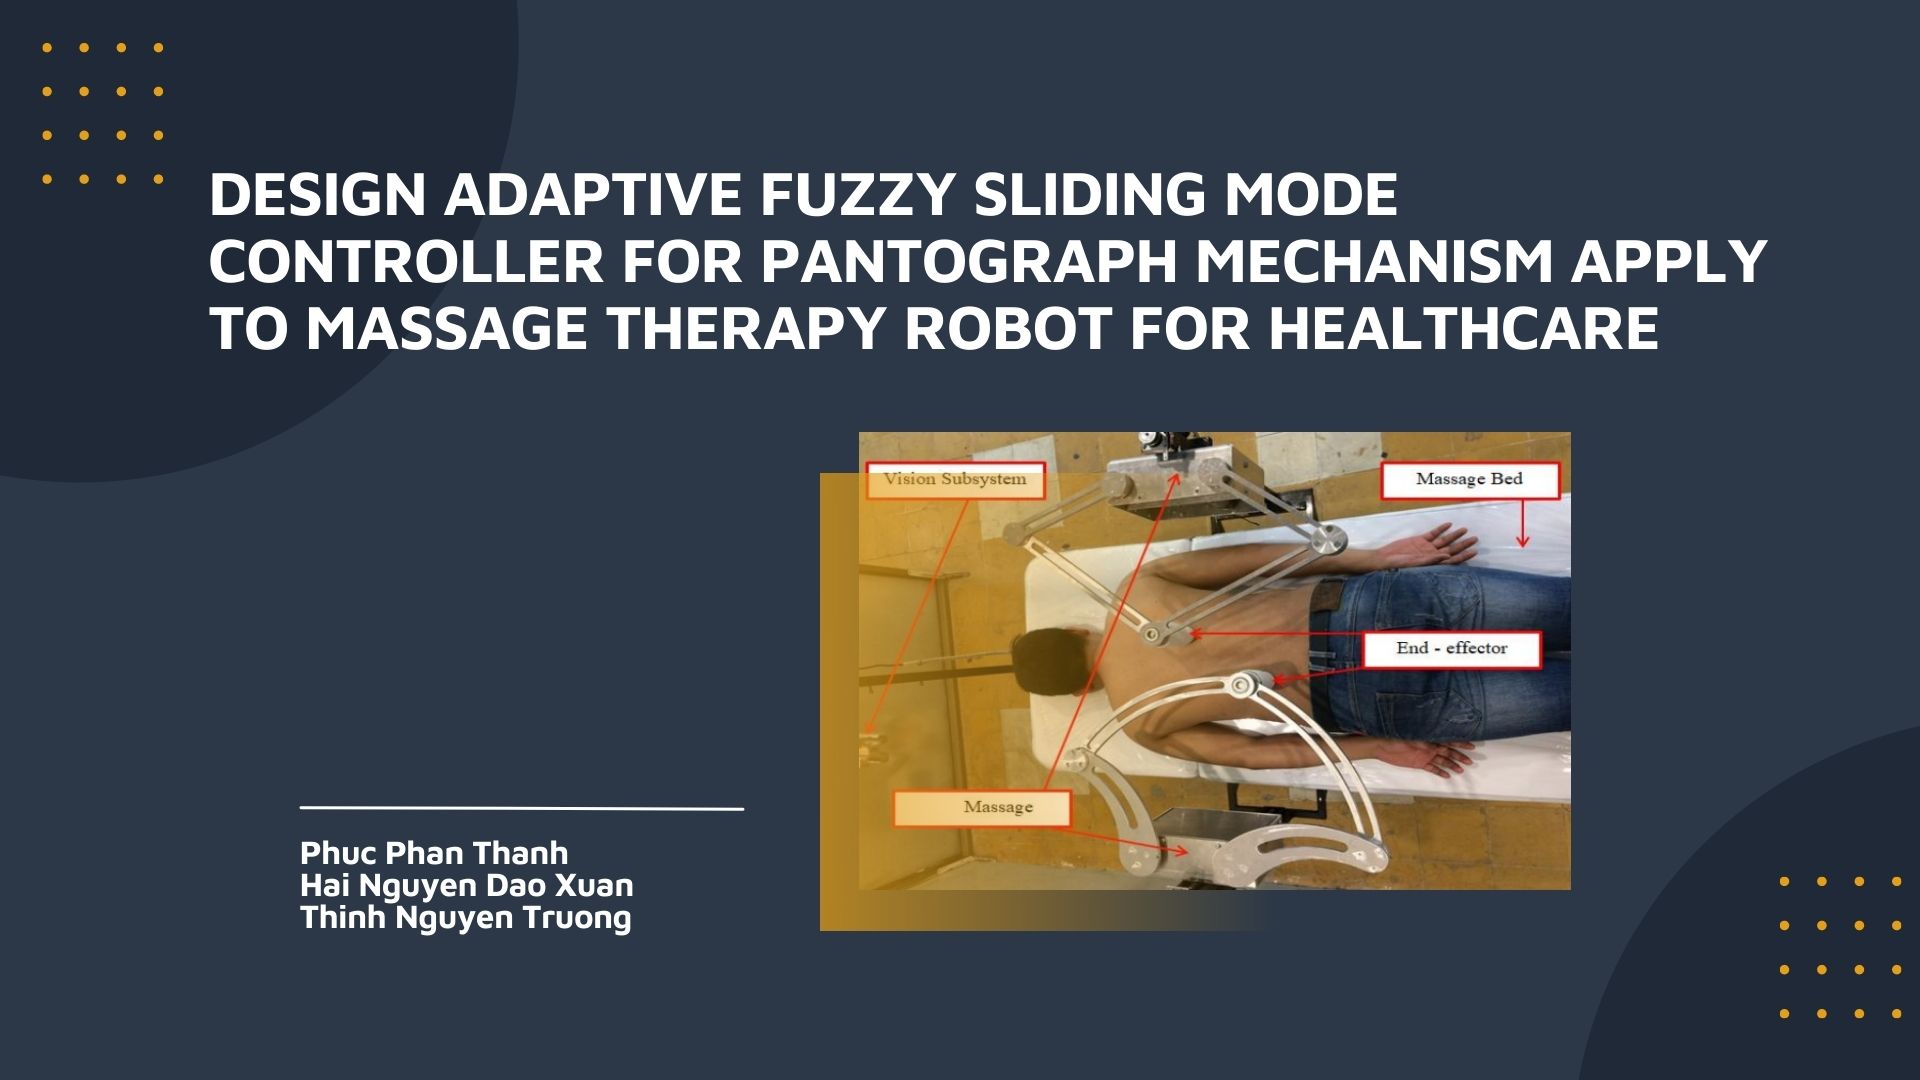 Design Adaptive Fuzzy Sliding Mode Controller for Pantograph Mechanism Apply to Massage Therapy Robot for Healthcare